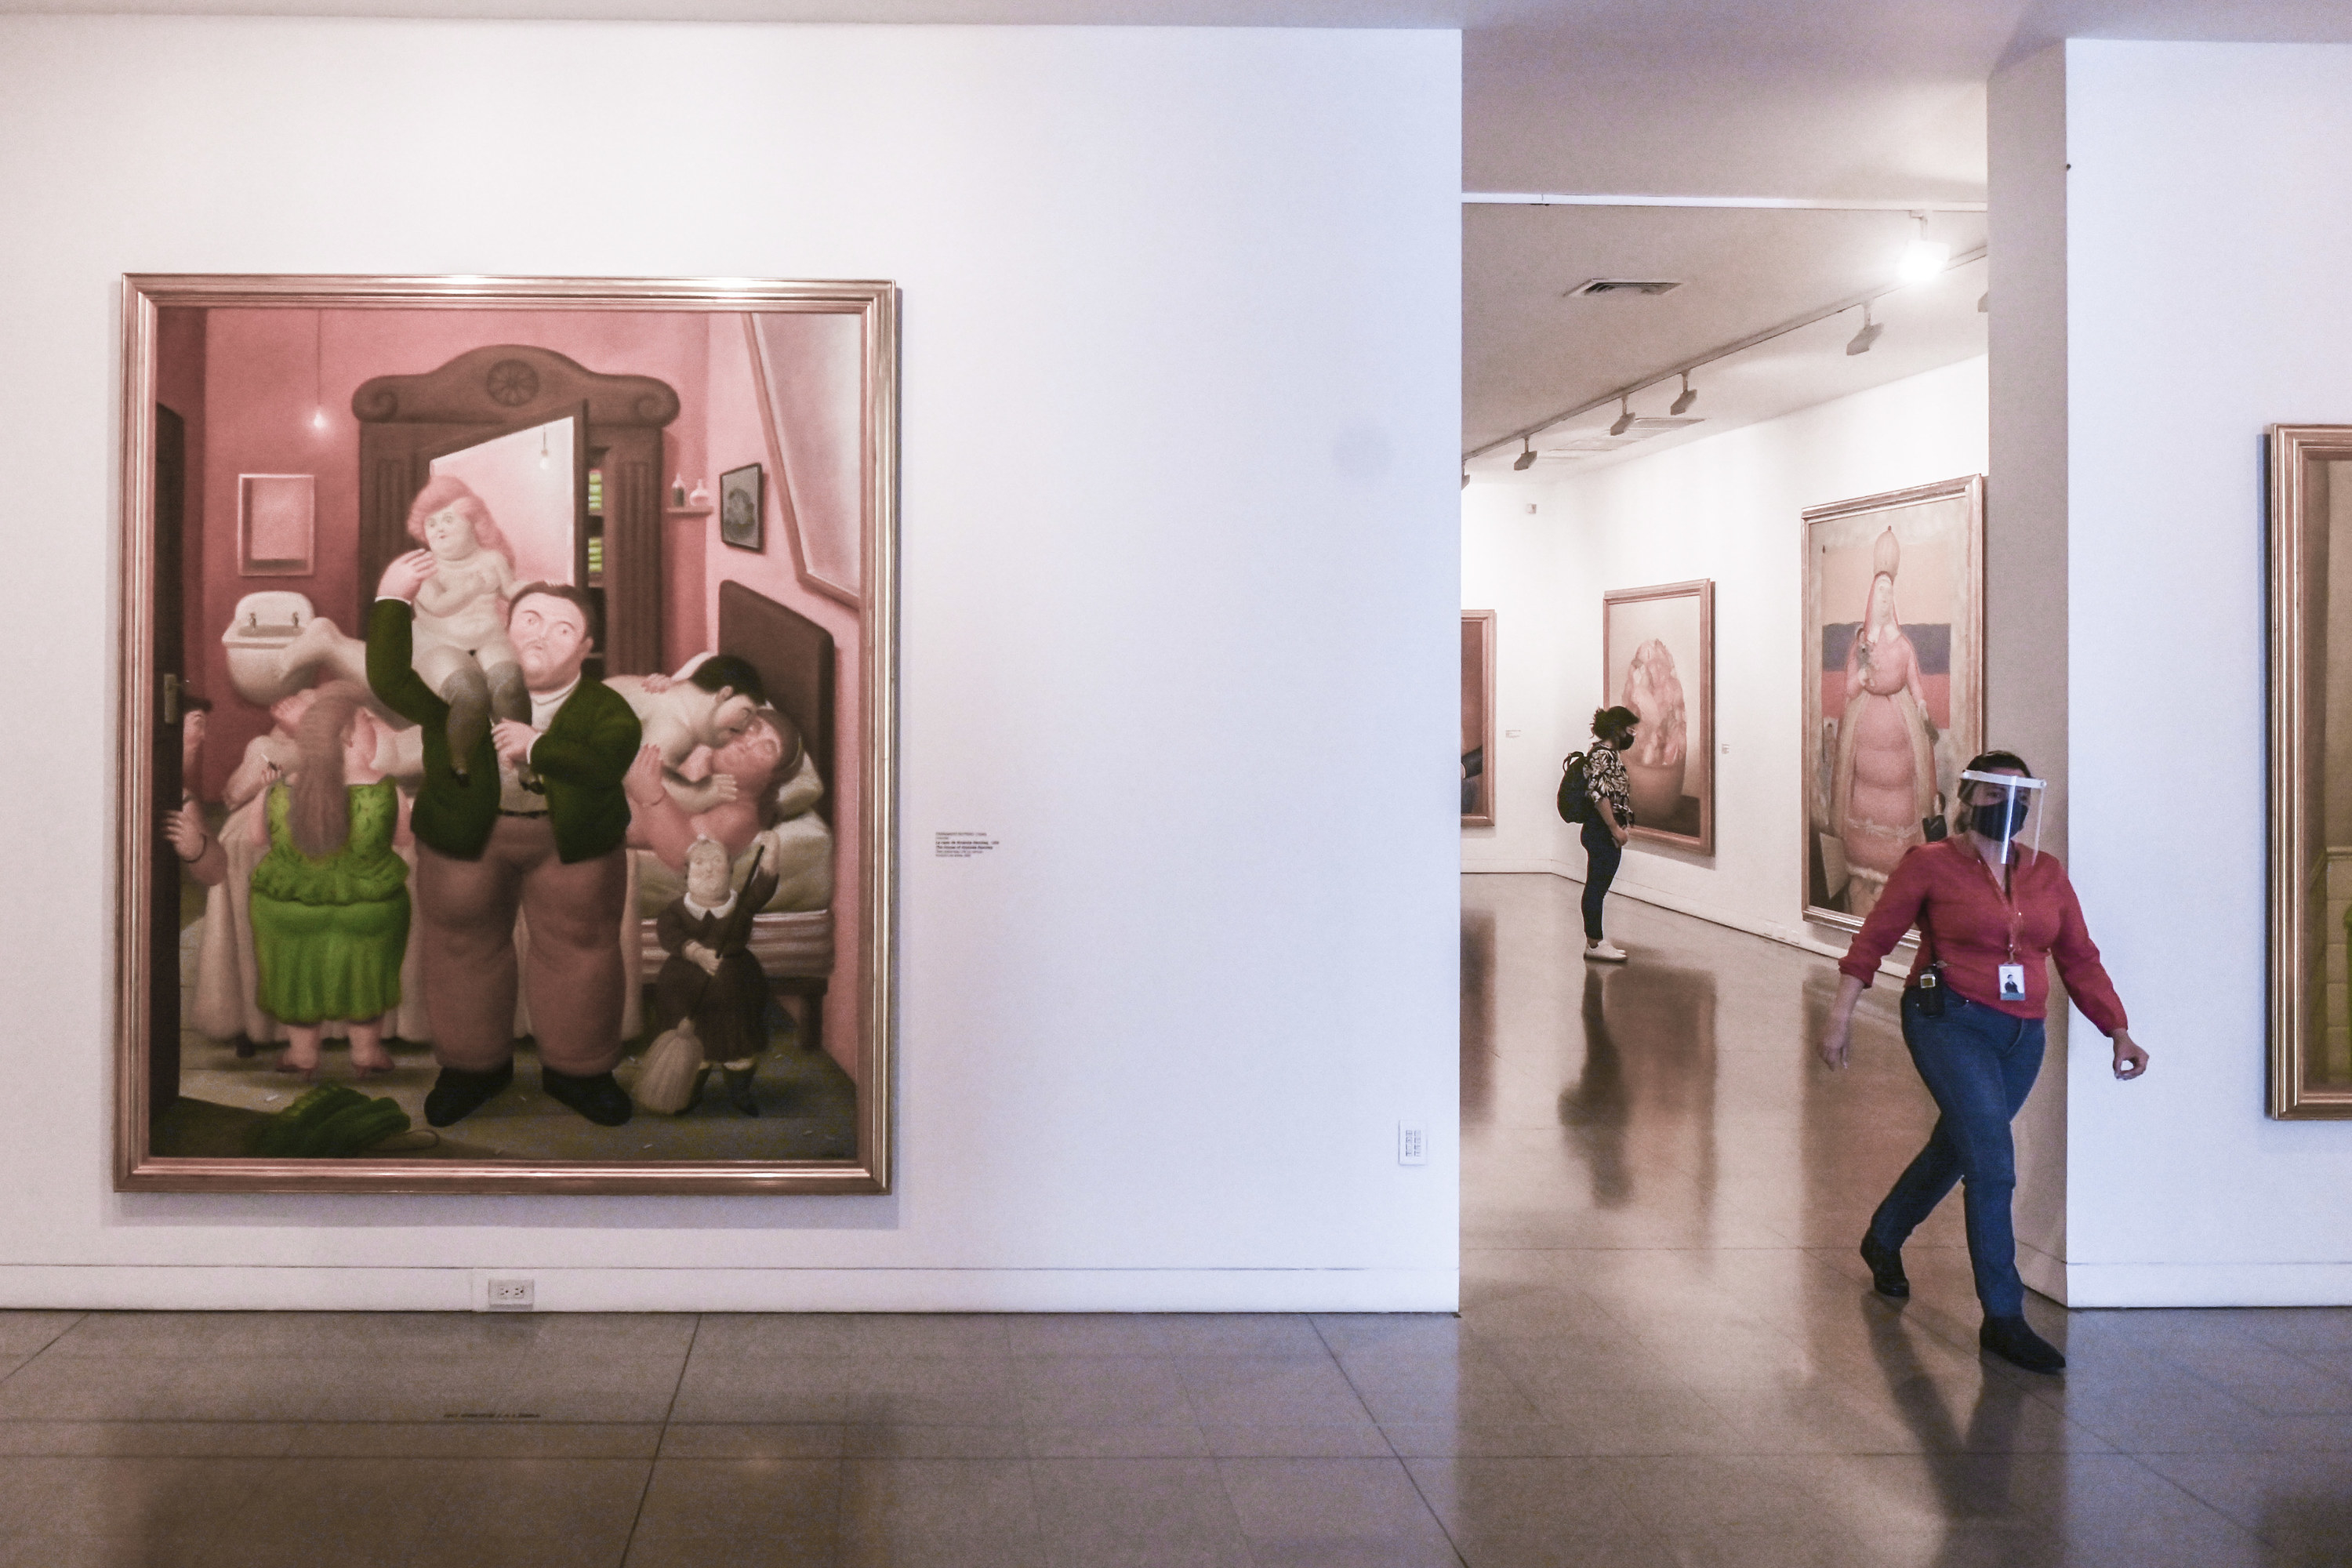 A person wearing a face mask and shield walks between rooms in an art gallery where large paintings are framed on the walls and only one other visitor is seen in the background